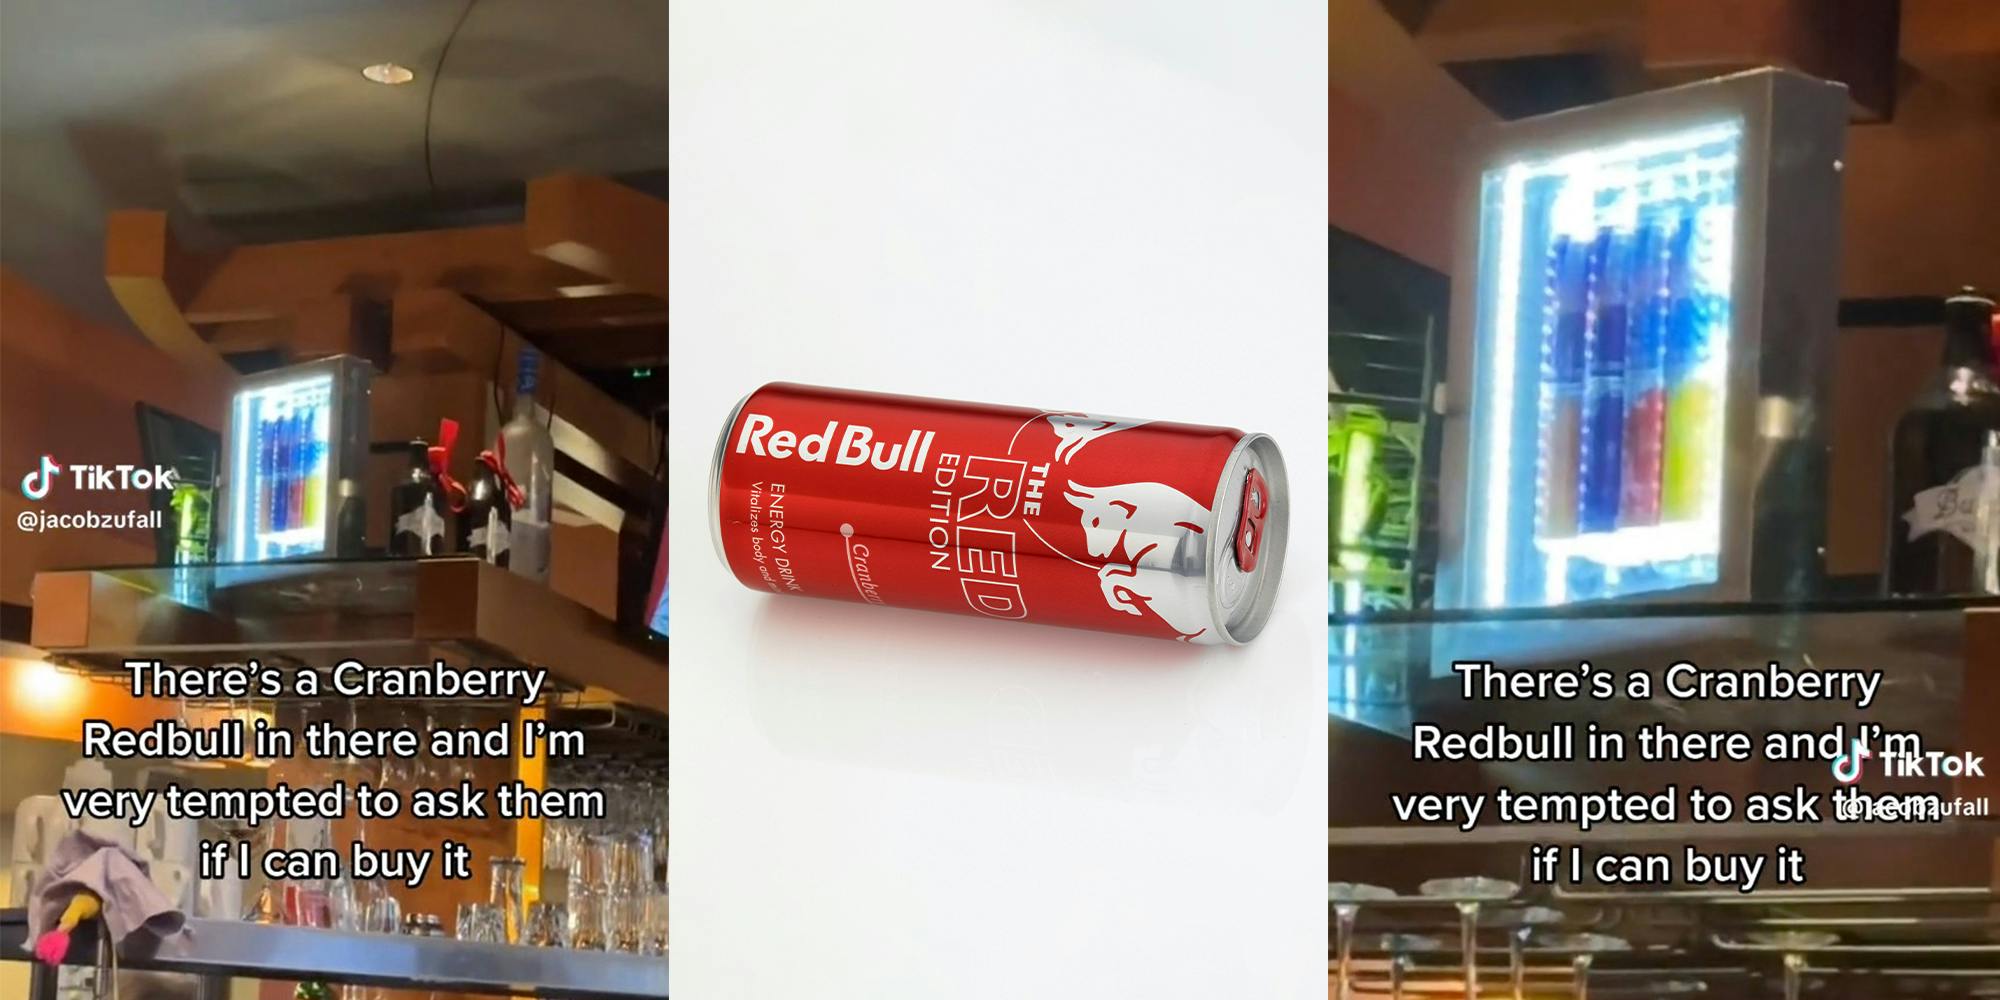 Cranberry Red Bull spotted in case above bar. Red Edition RedBull Cranberry